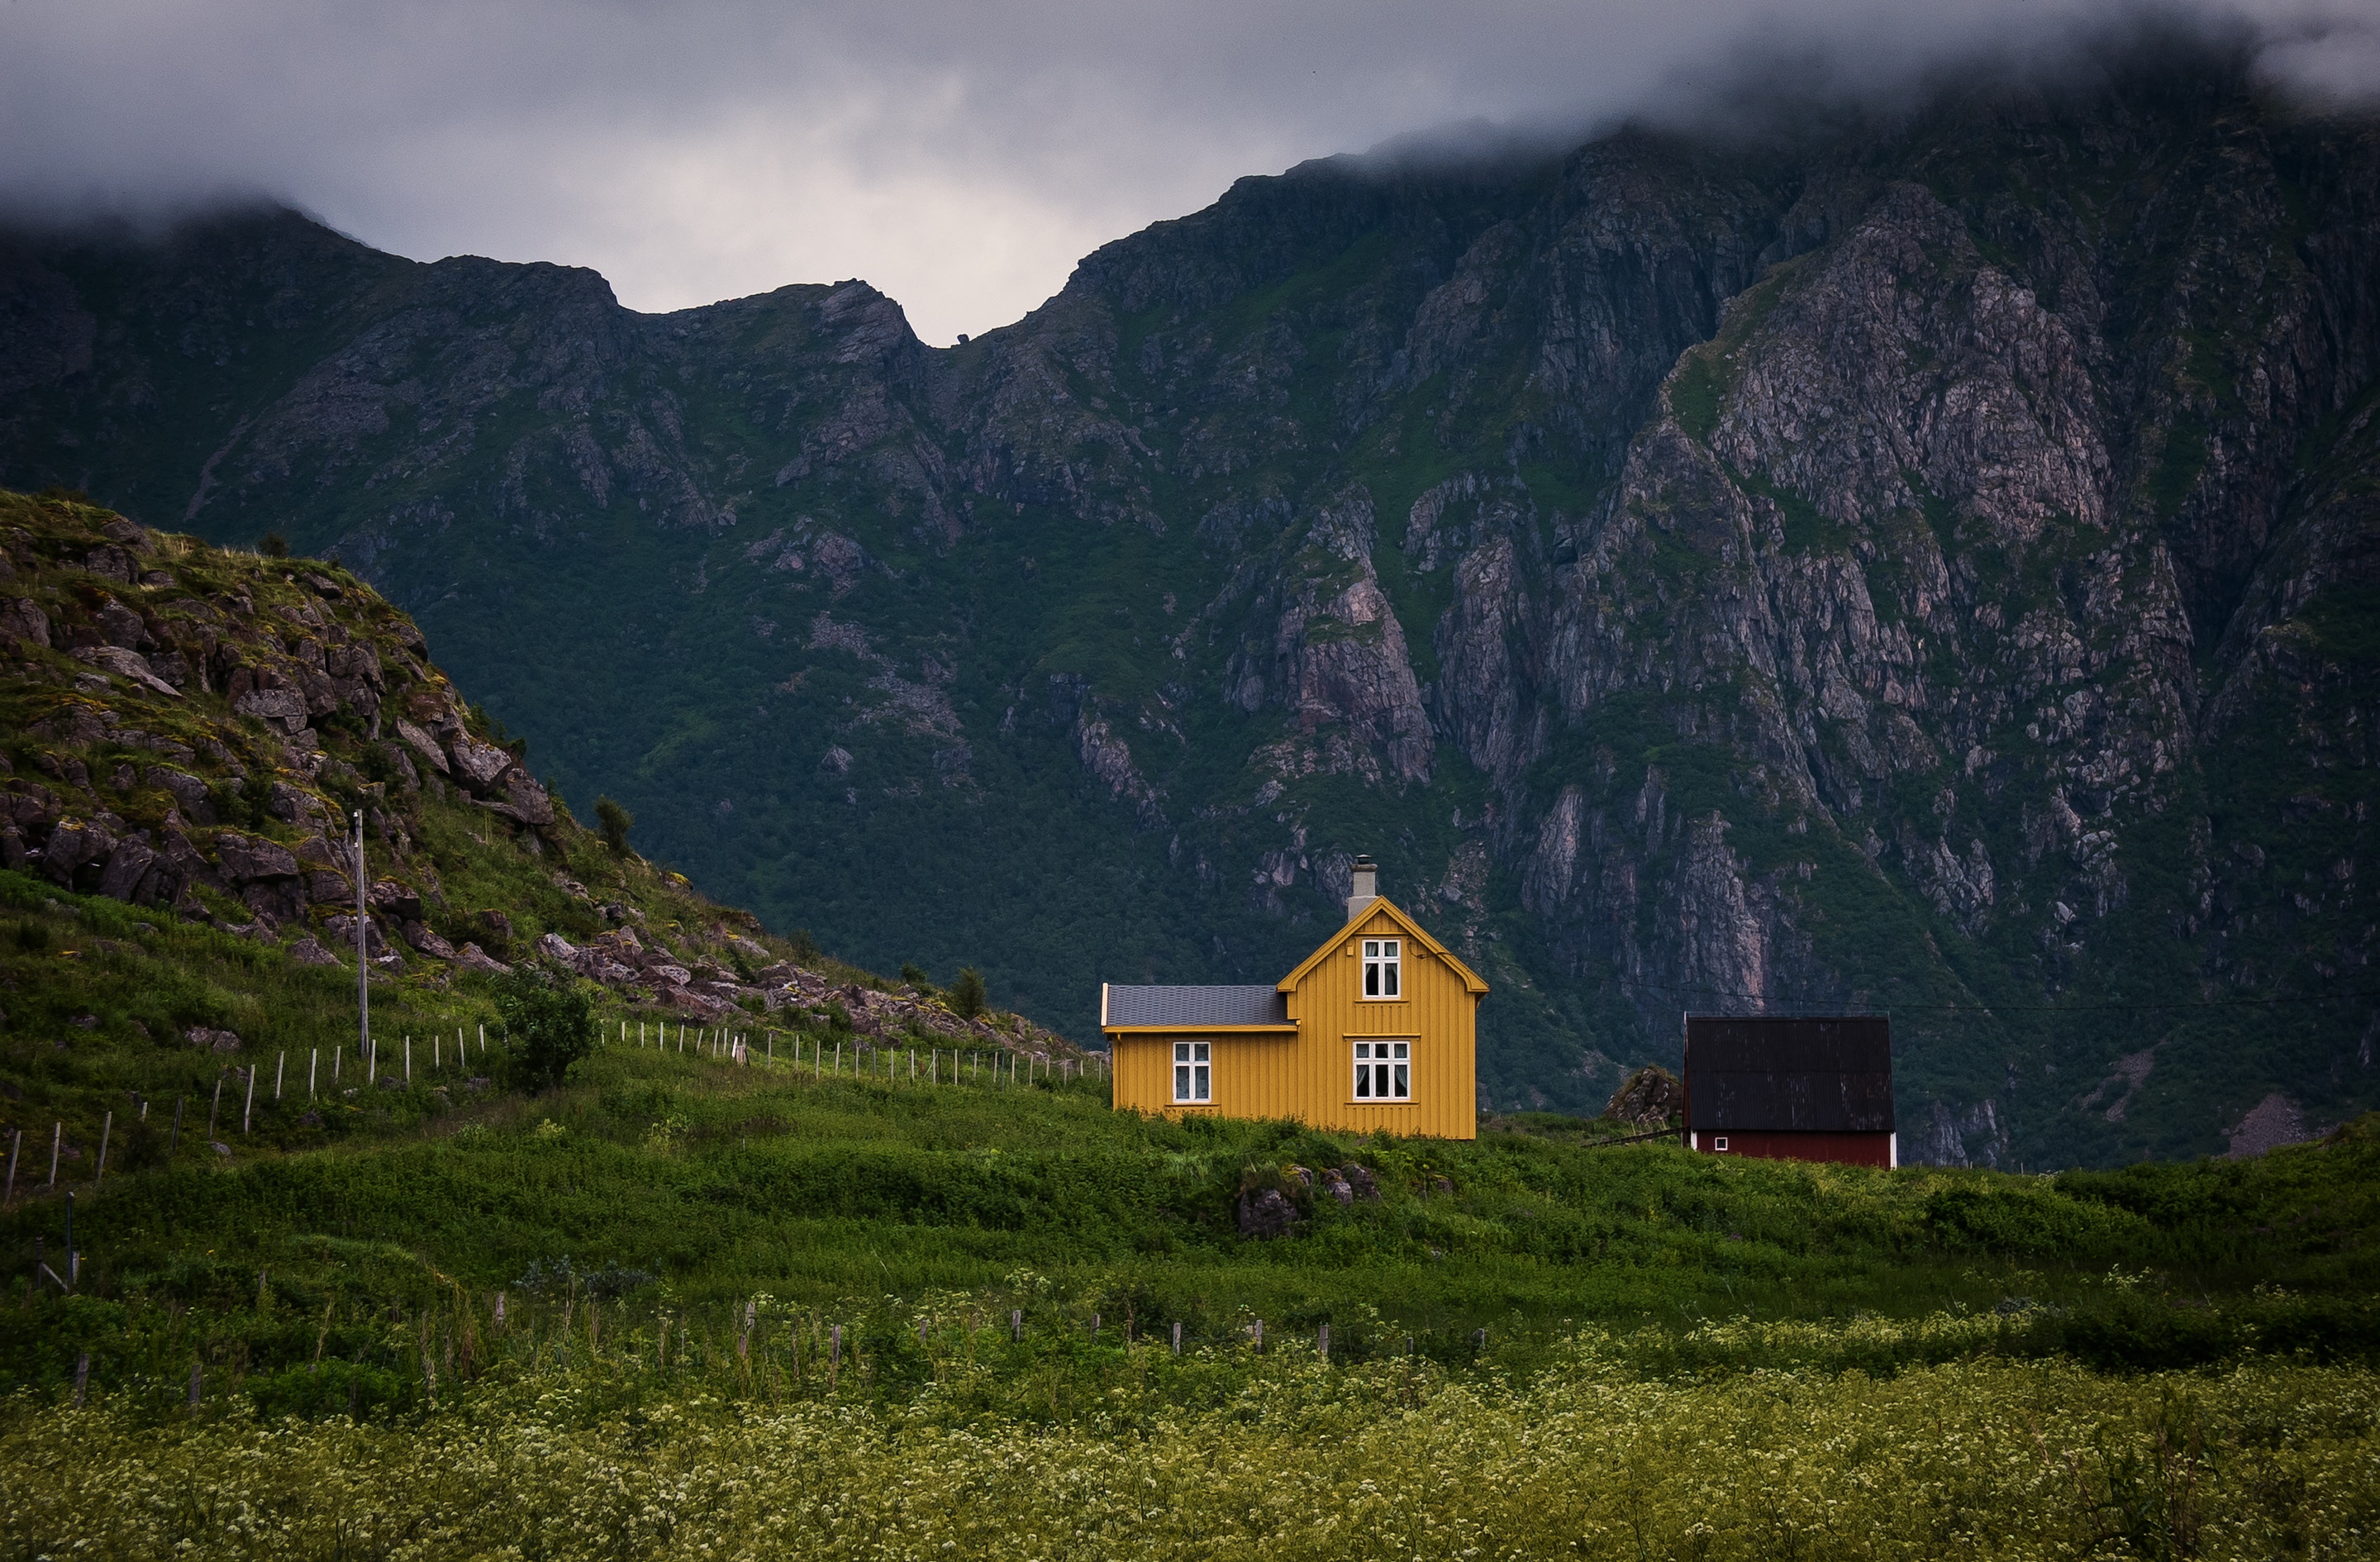 seclusion, small house, privacy, nature, grass, mountains, clouds, lodge